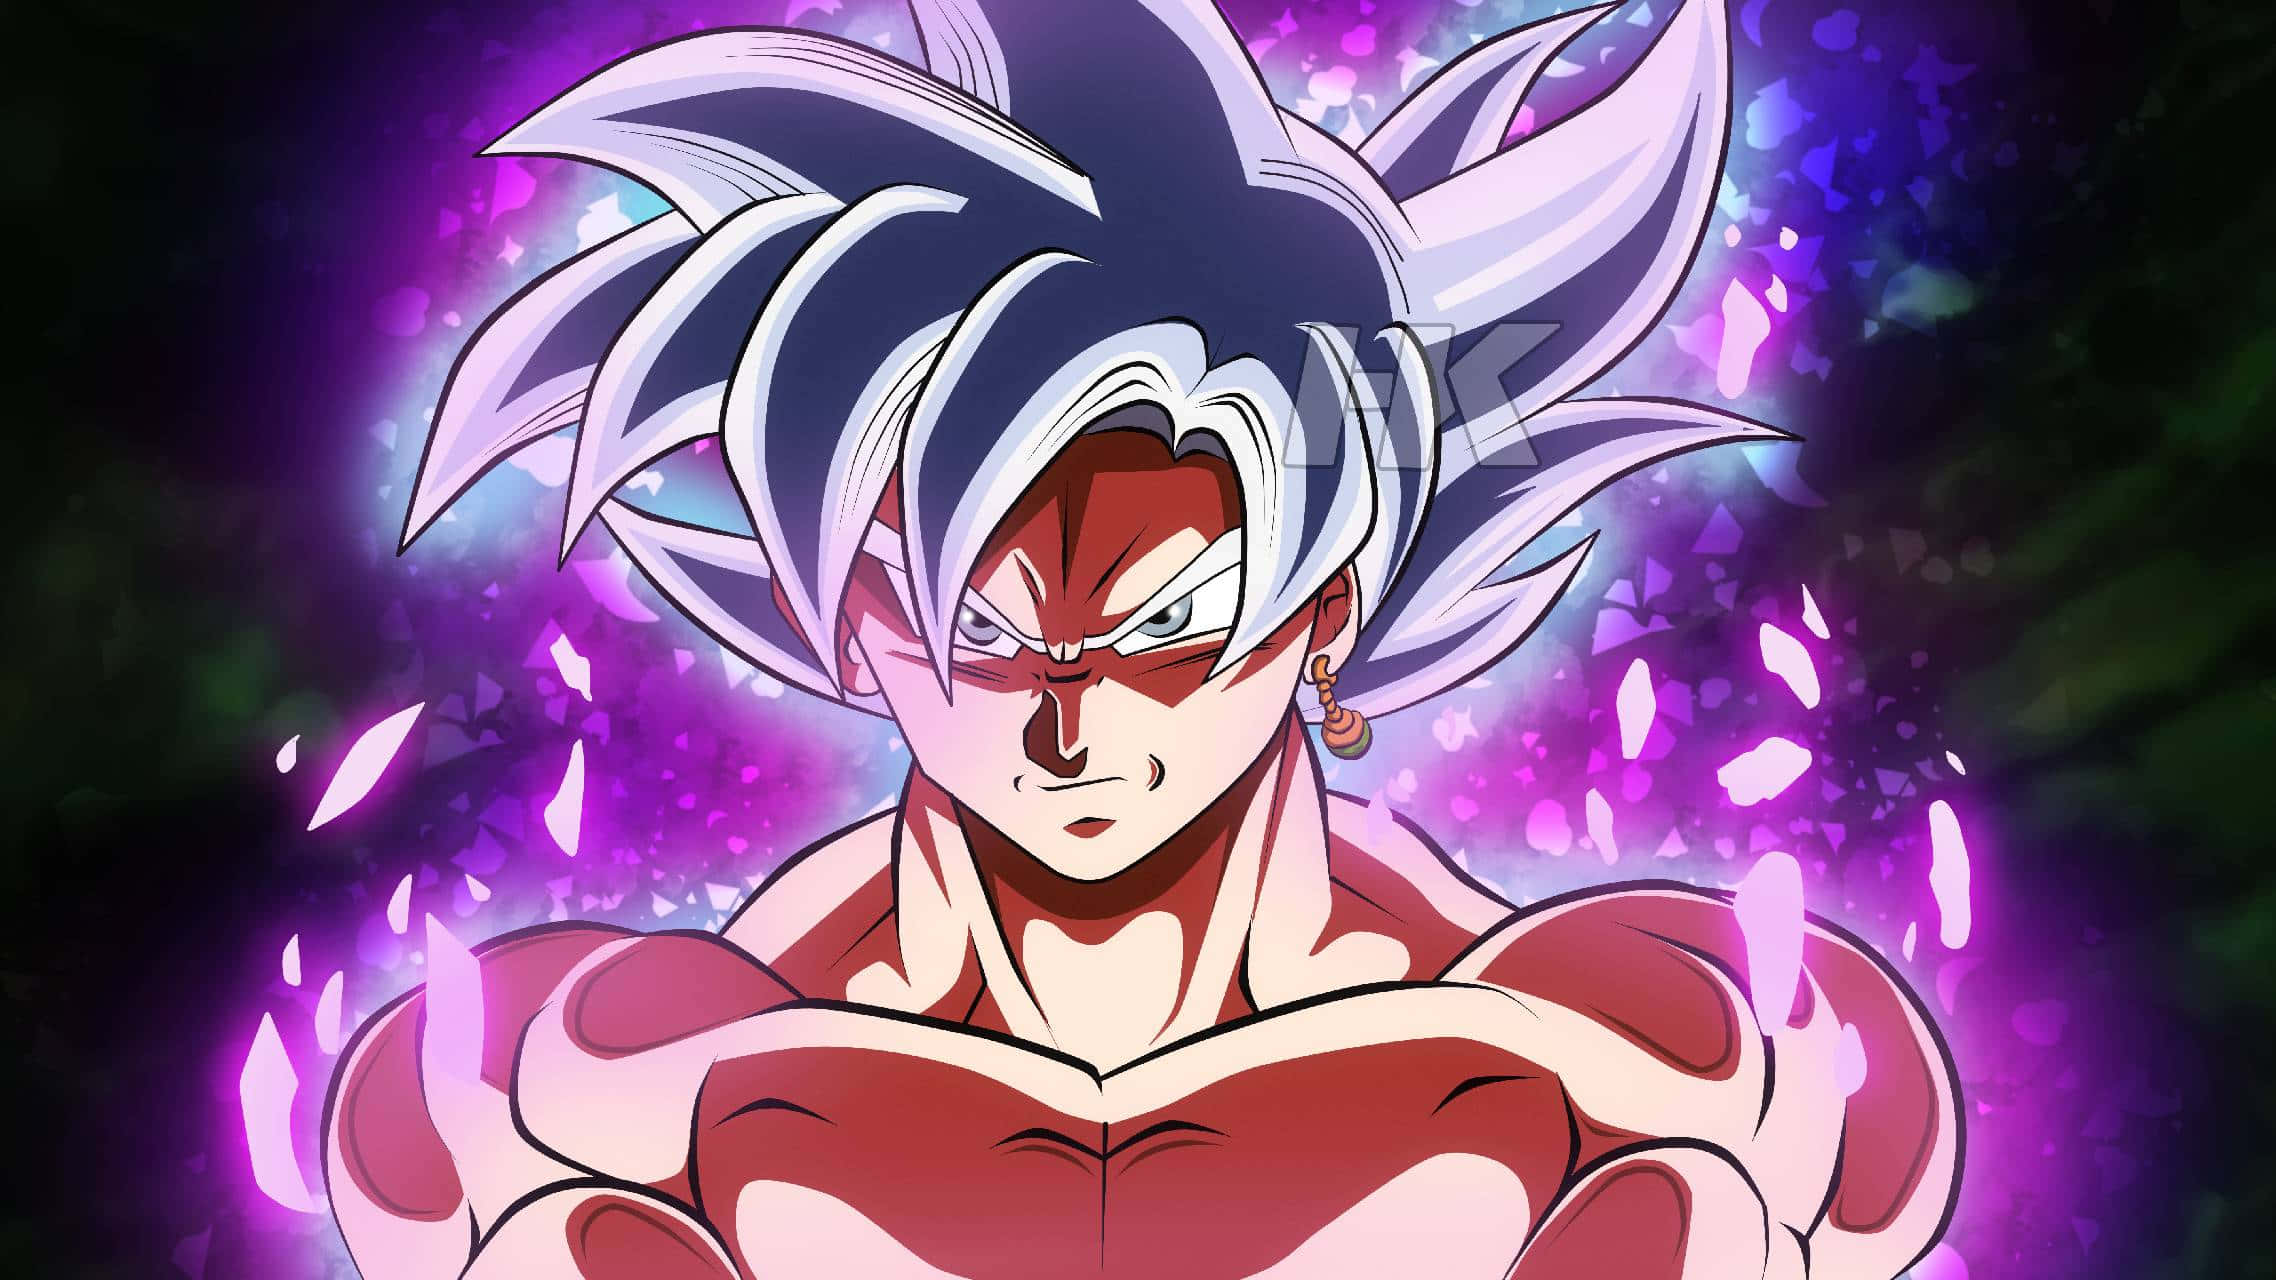 Unlock your potential to become a Super Saiyan." Wallpaper